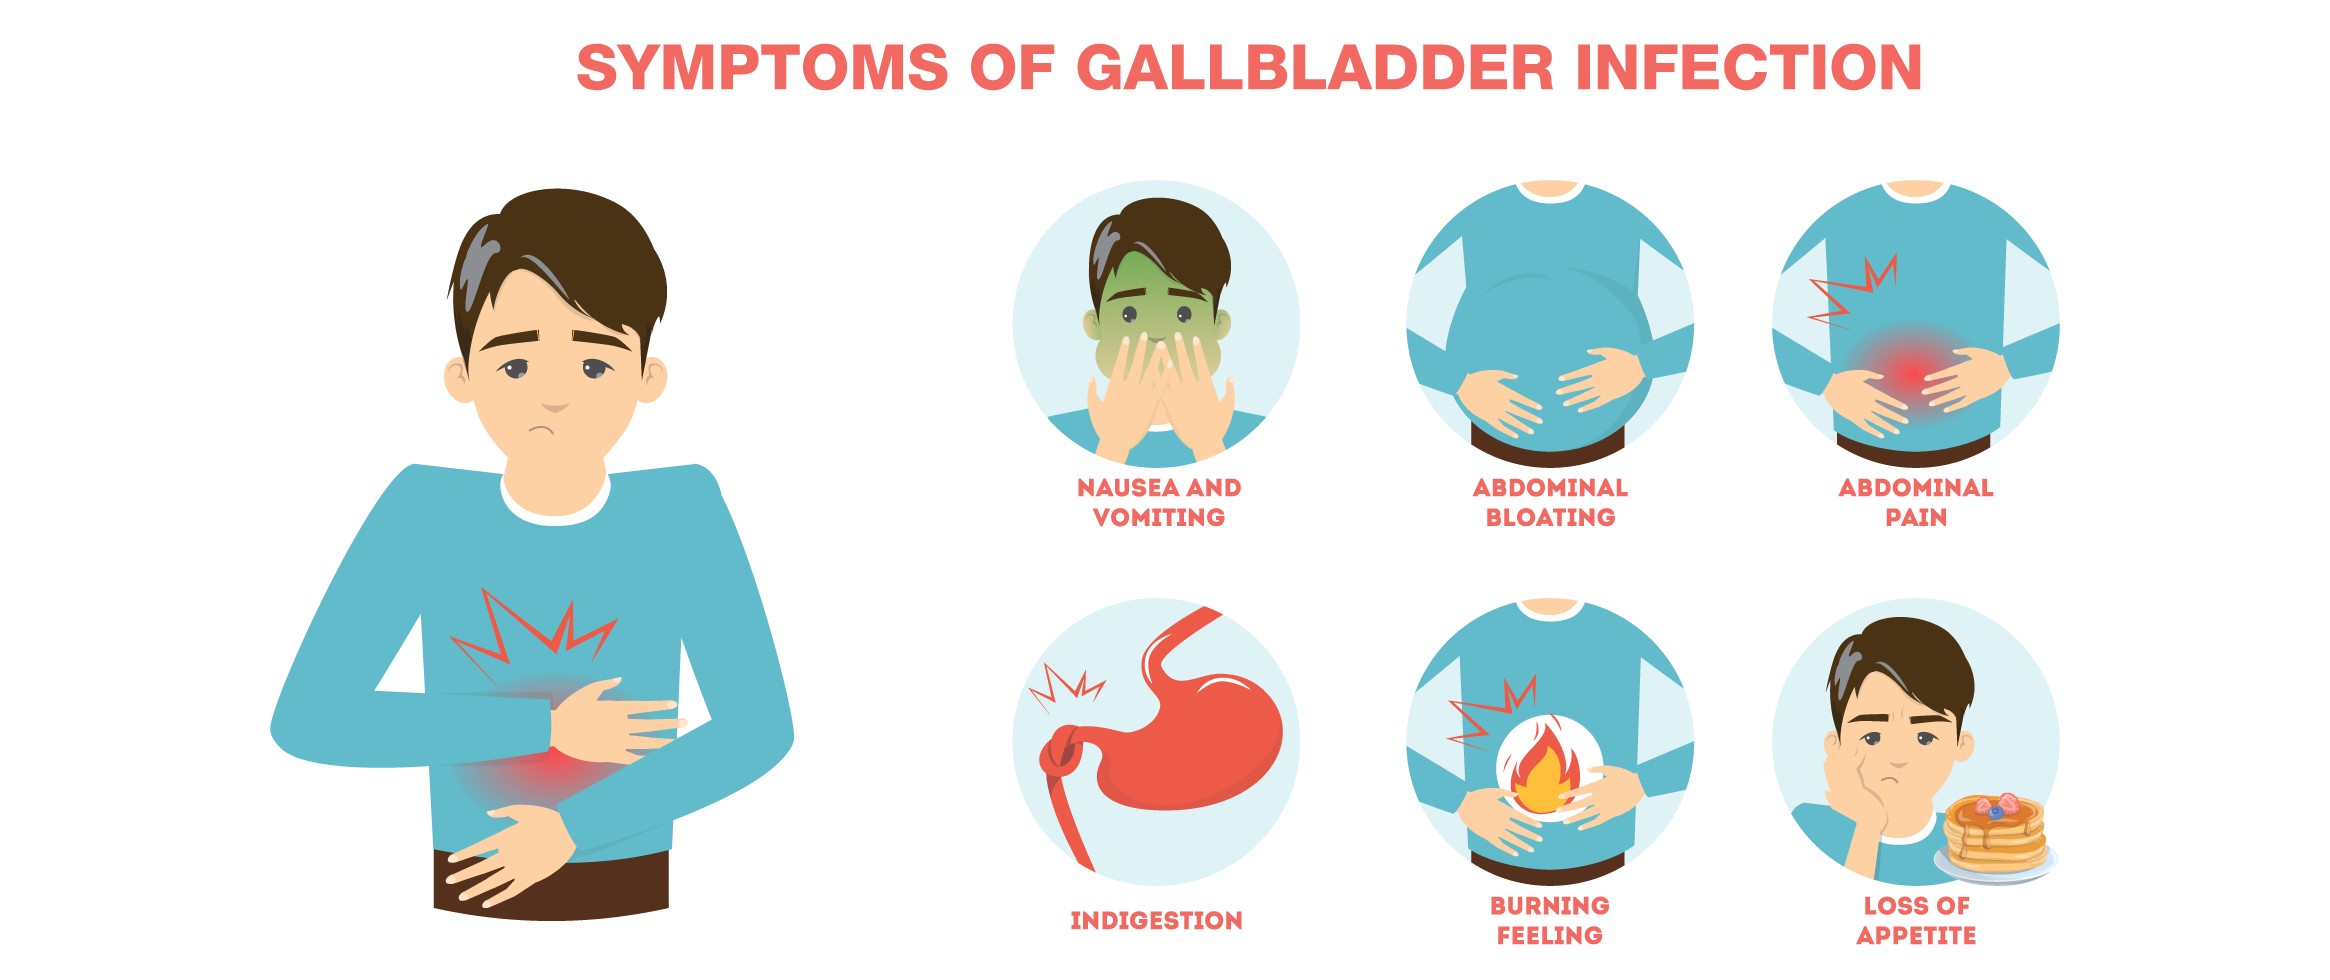 Gallbladder: Functions, Disorders, and Diagnostic Tests